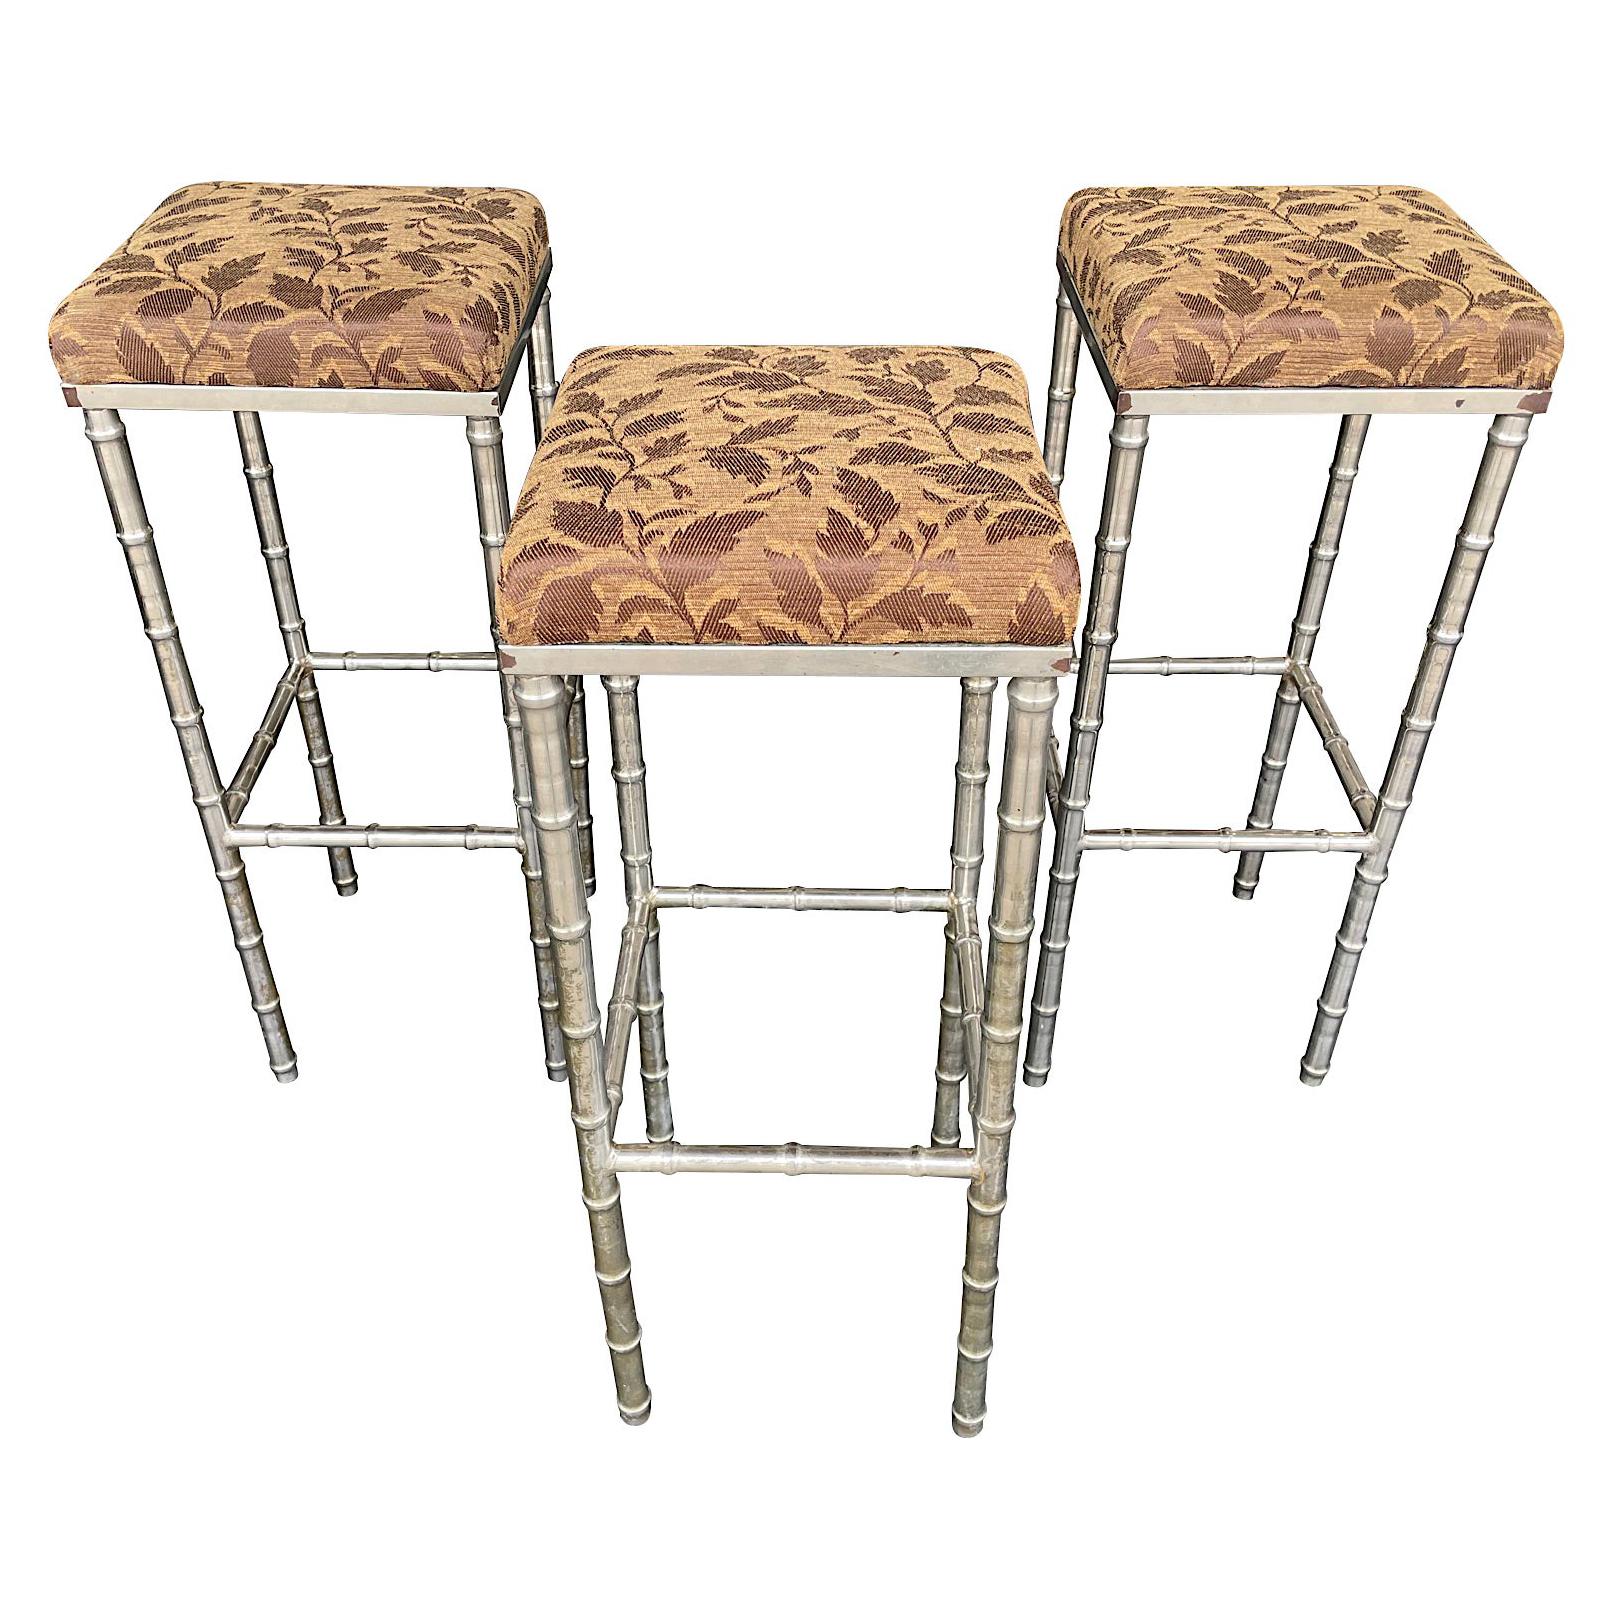 Set of 3 French 1960s Faux Bamboo Chrome Barstools with Original Leaf Fabric